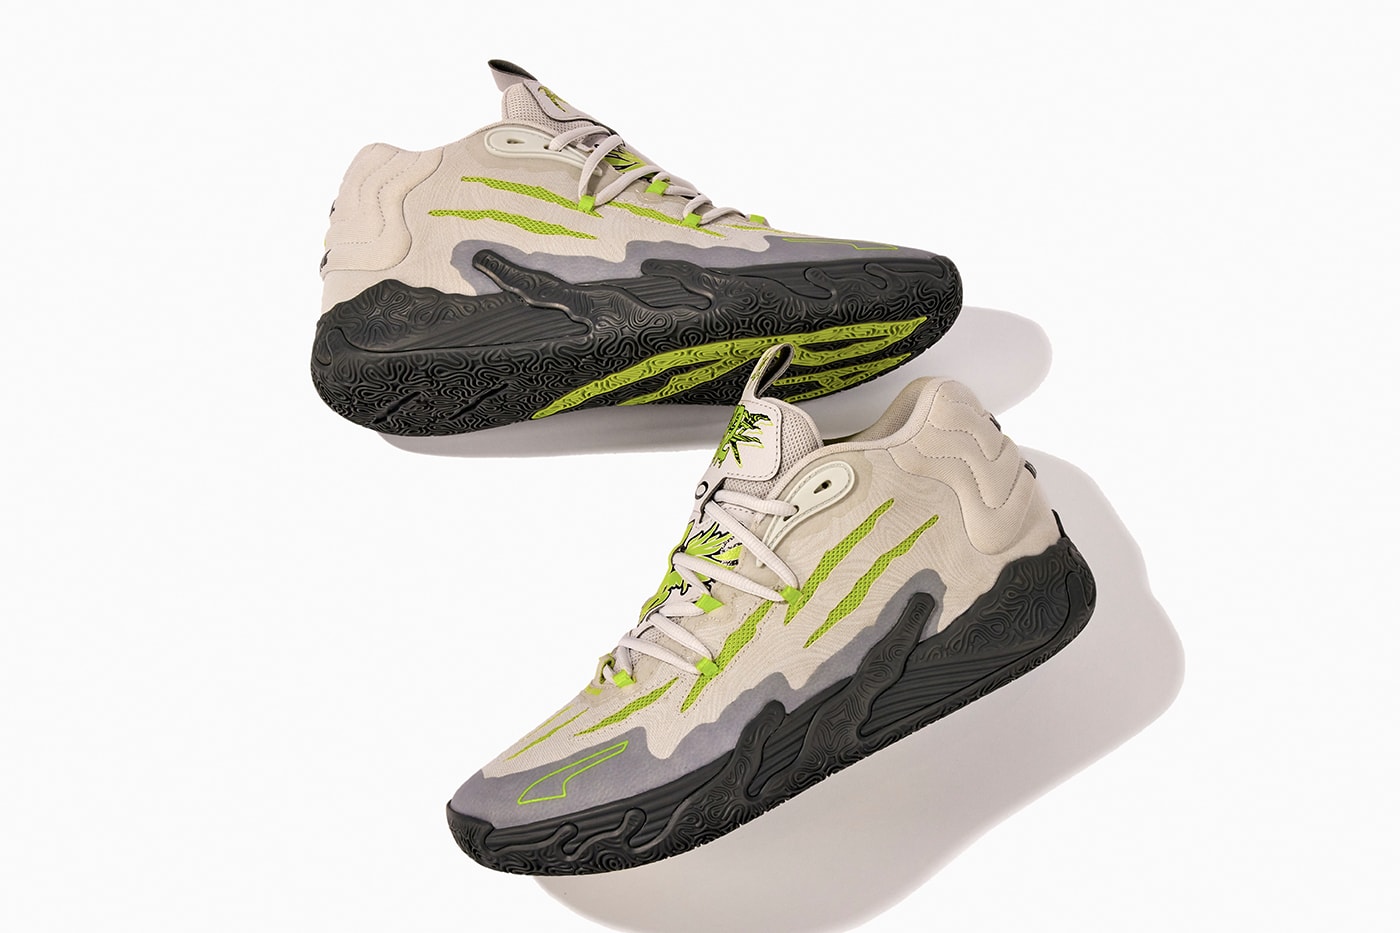 LaMelo Ball and Puma Drop the MB.03 "Chino Hills" Colorway 379235-01 Feather Gray/Lime Smash 